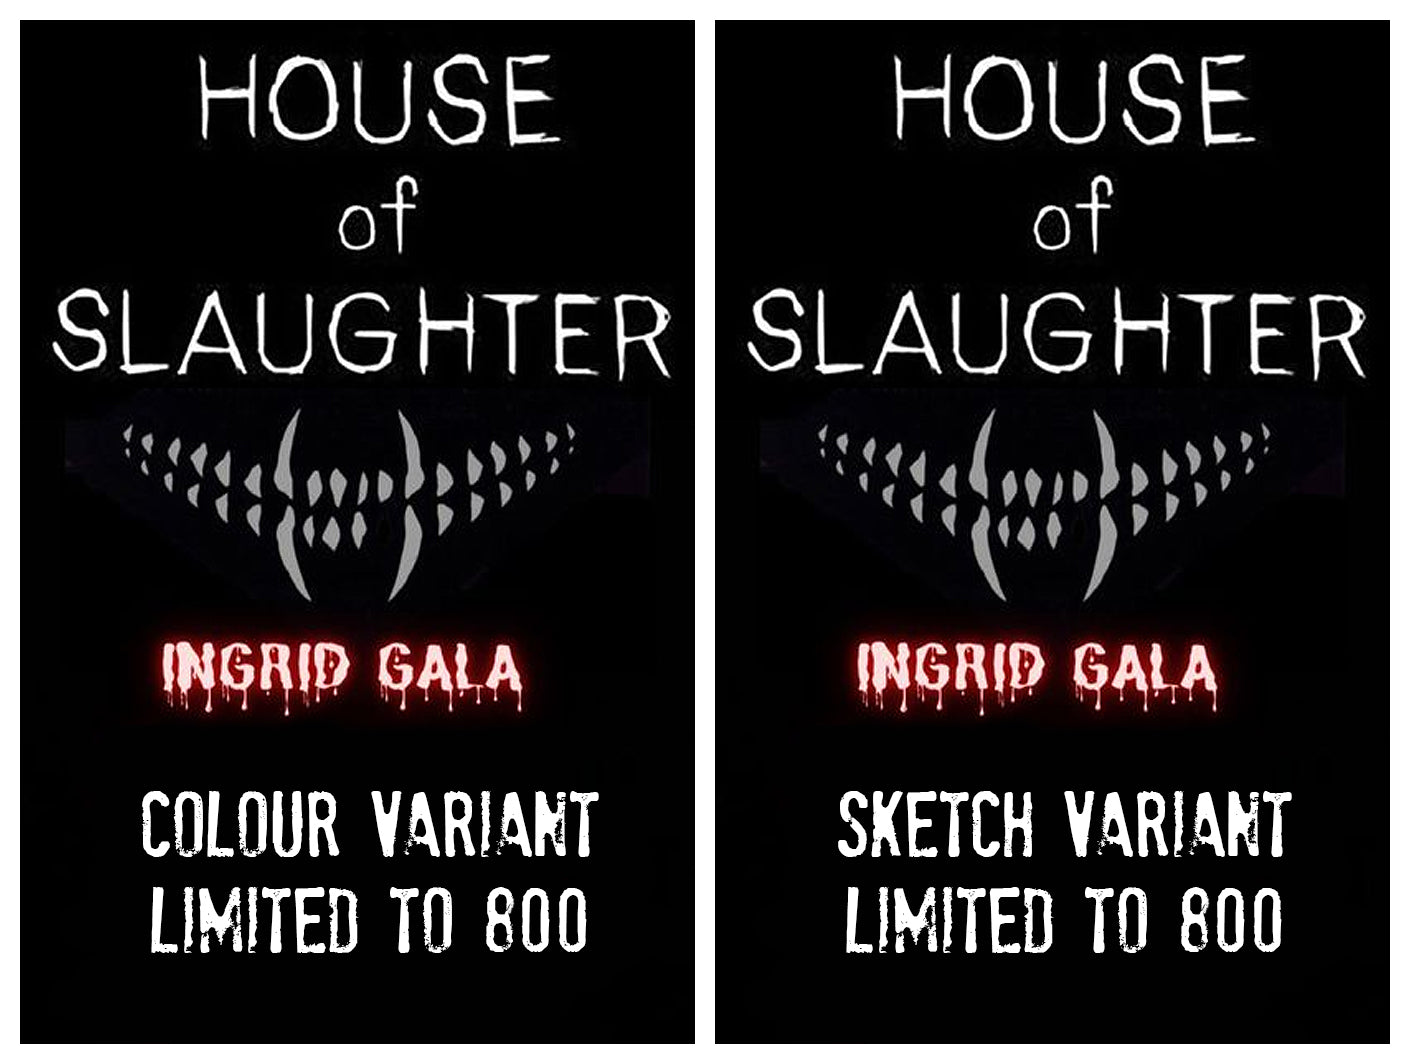 HOUSE OF SLAUGHTER #1 INGRID GALA COLOUR/BW VARIANT SET LIMITED TO 800 SETS